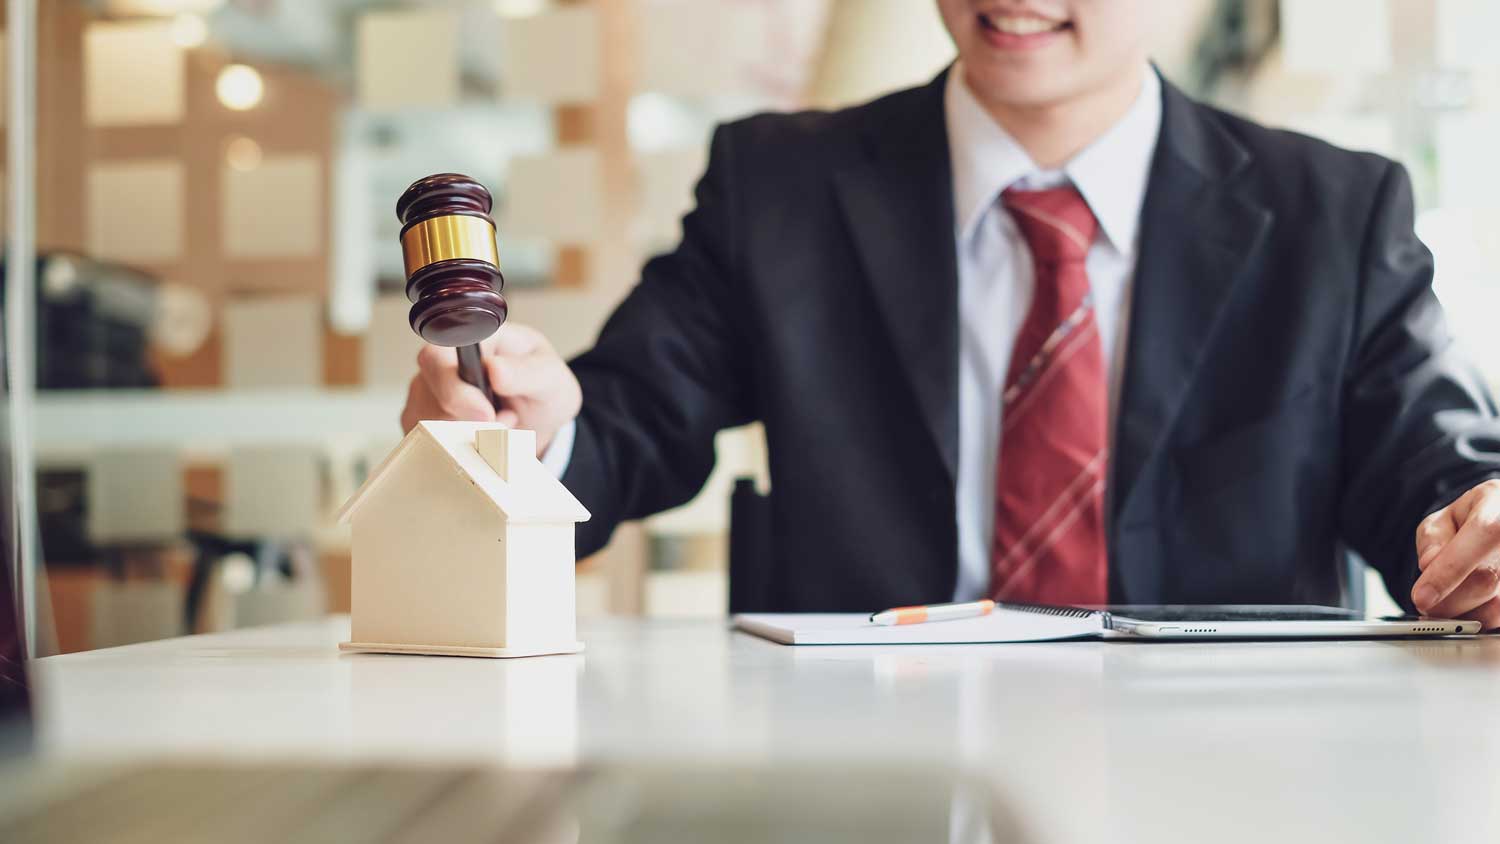 A man in suit and tie holding a gavel.